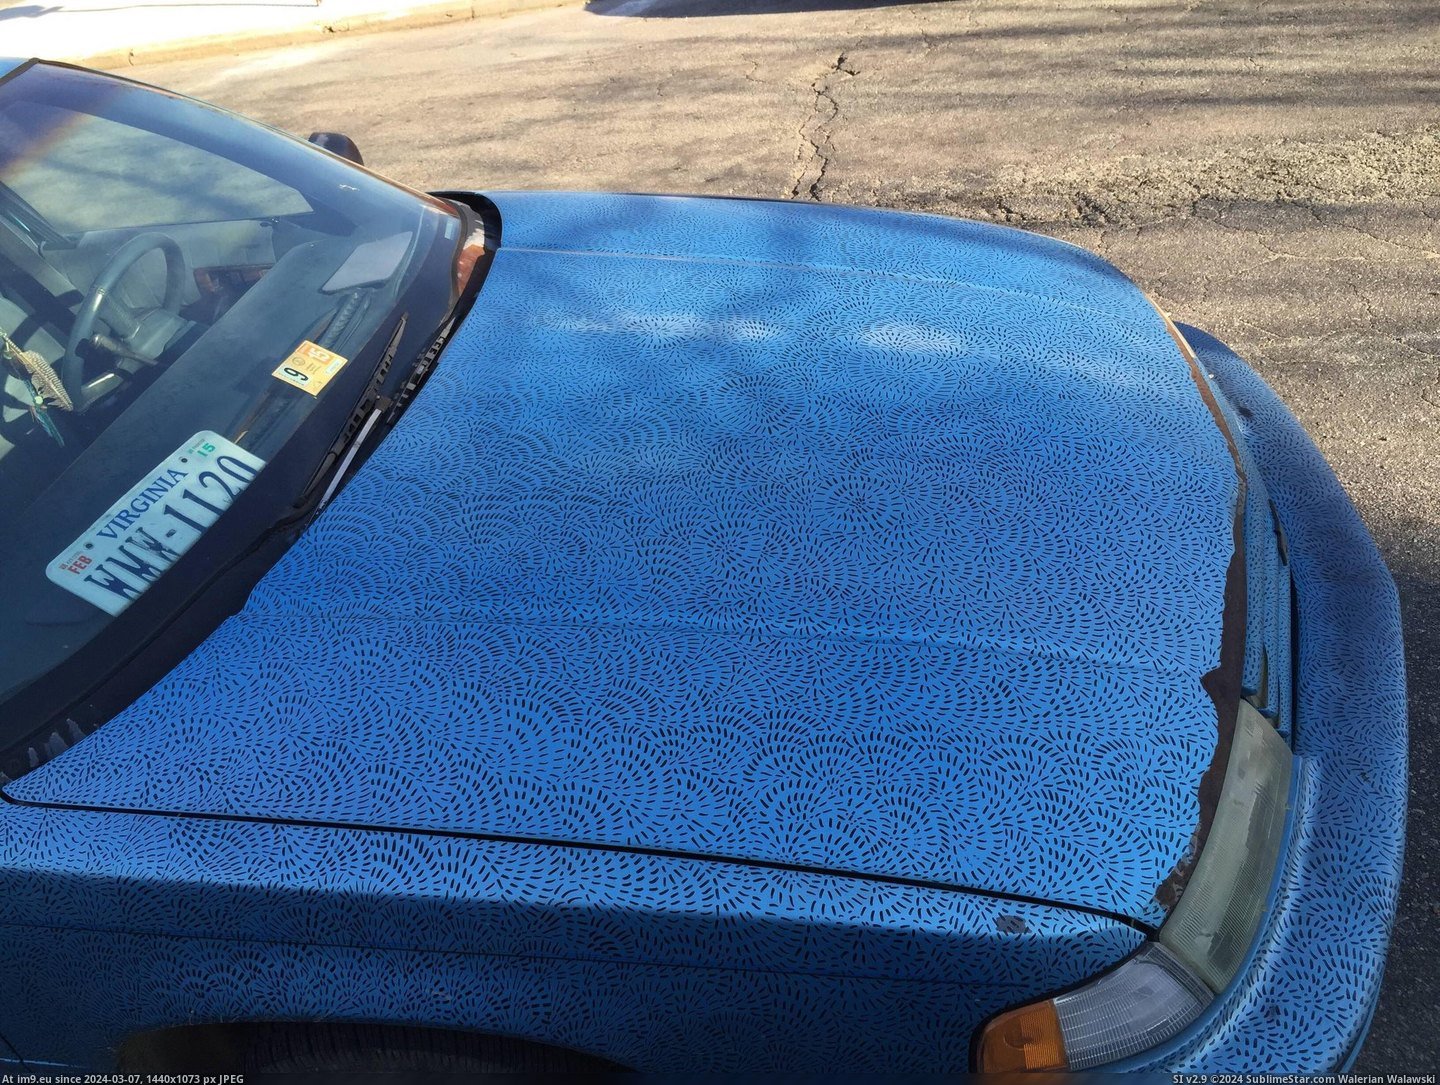 #Tiny #Entire #Sharpie #Markings #Car #Covered [Mildlyinteresting] The ENTIRE car was covered by tiny sharpie markings. Pic. (Bild von album My r/MILDLYINTERESTING favs))